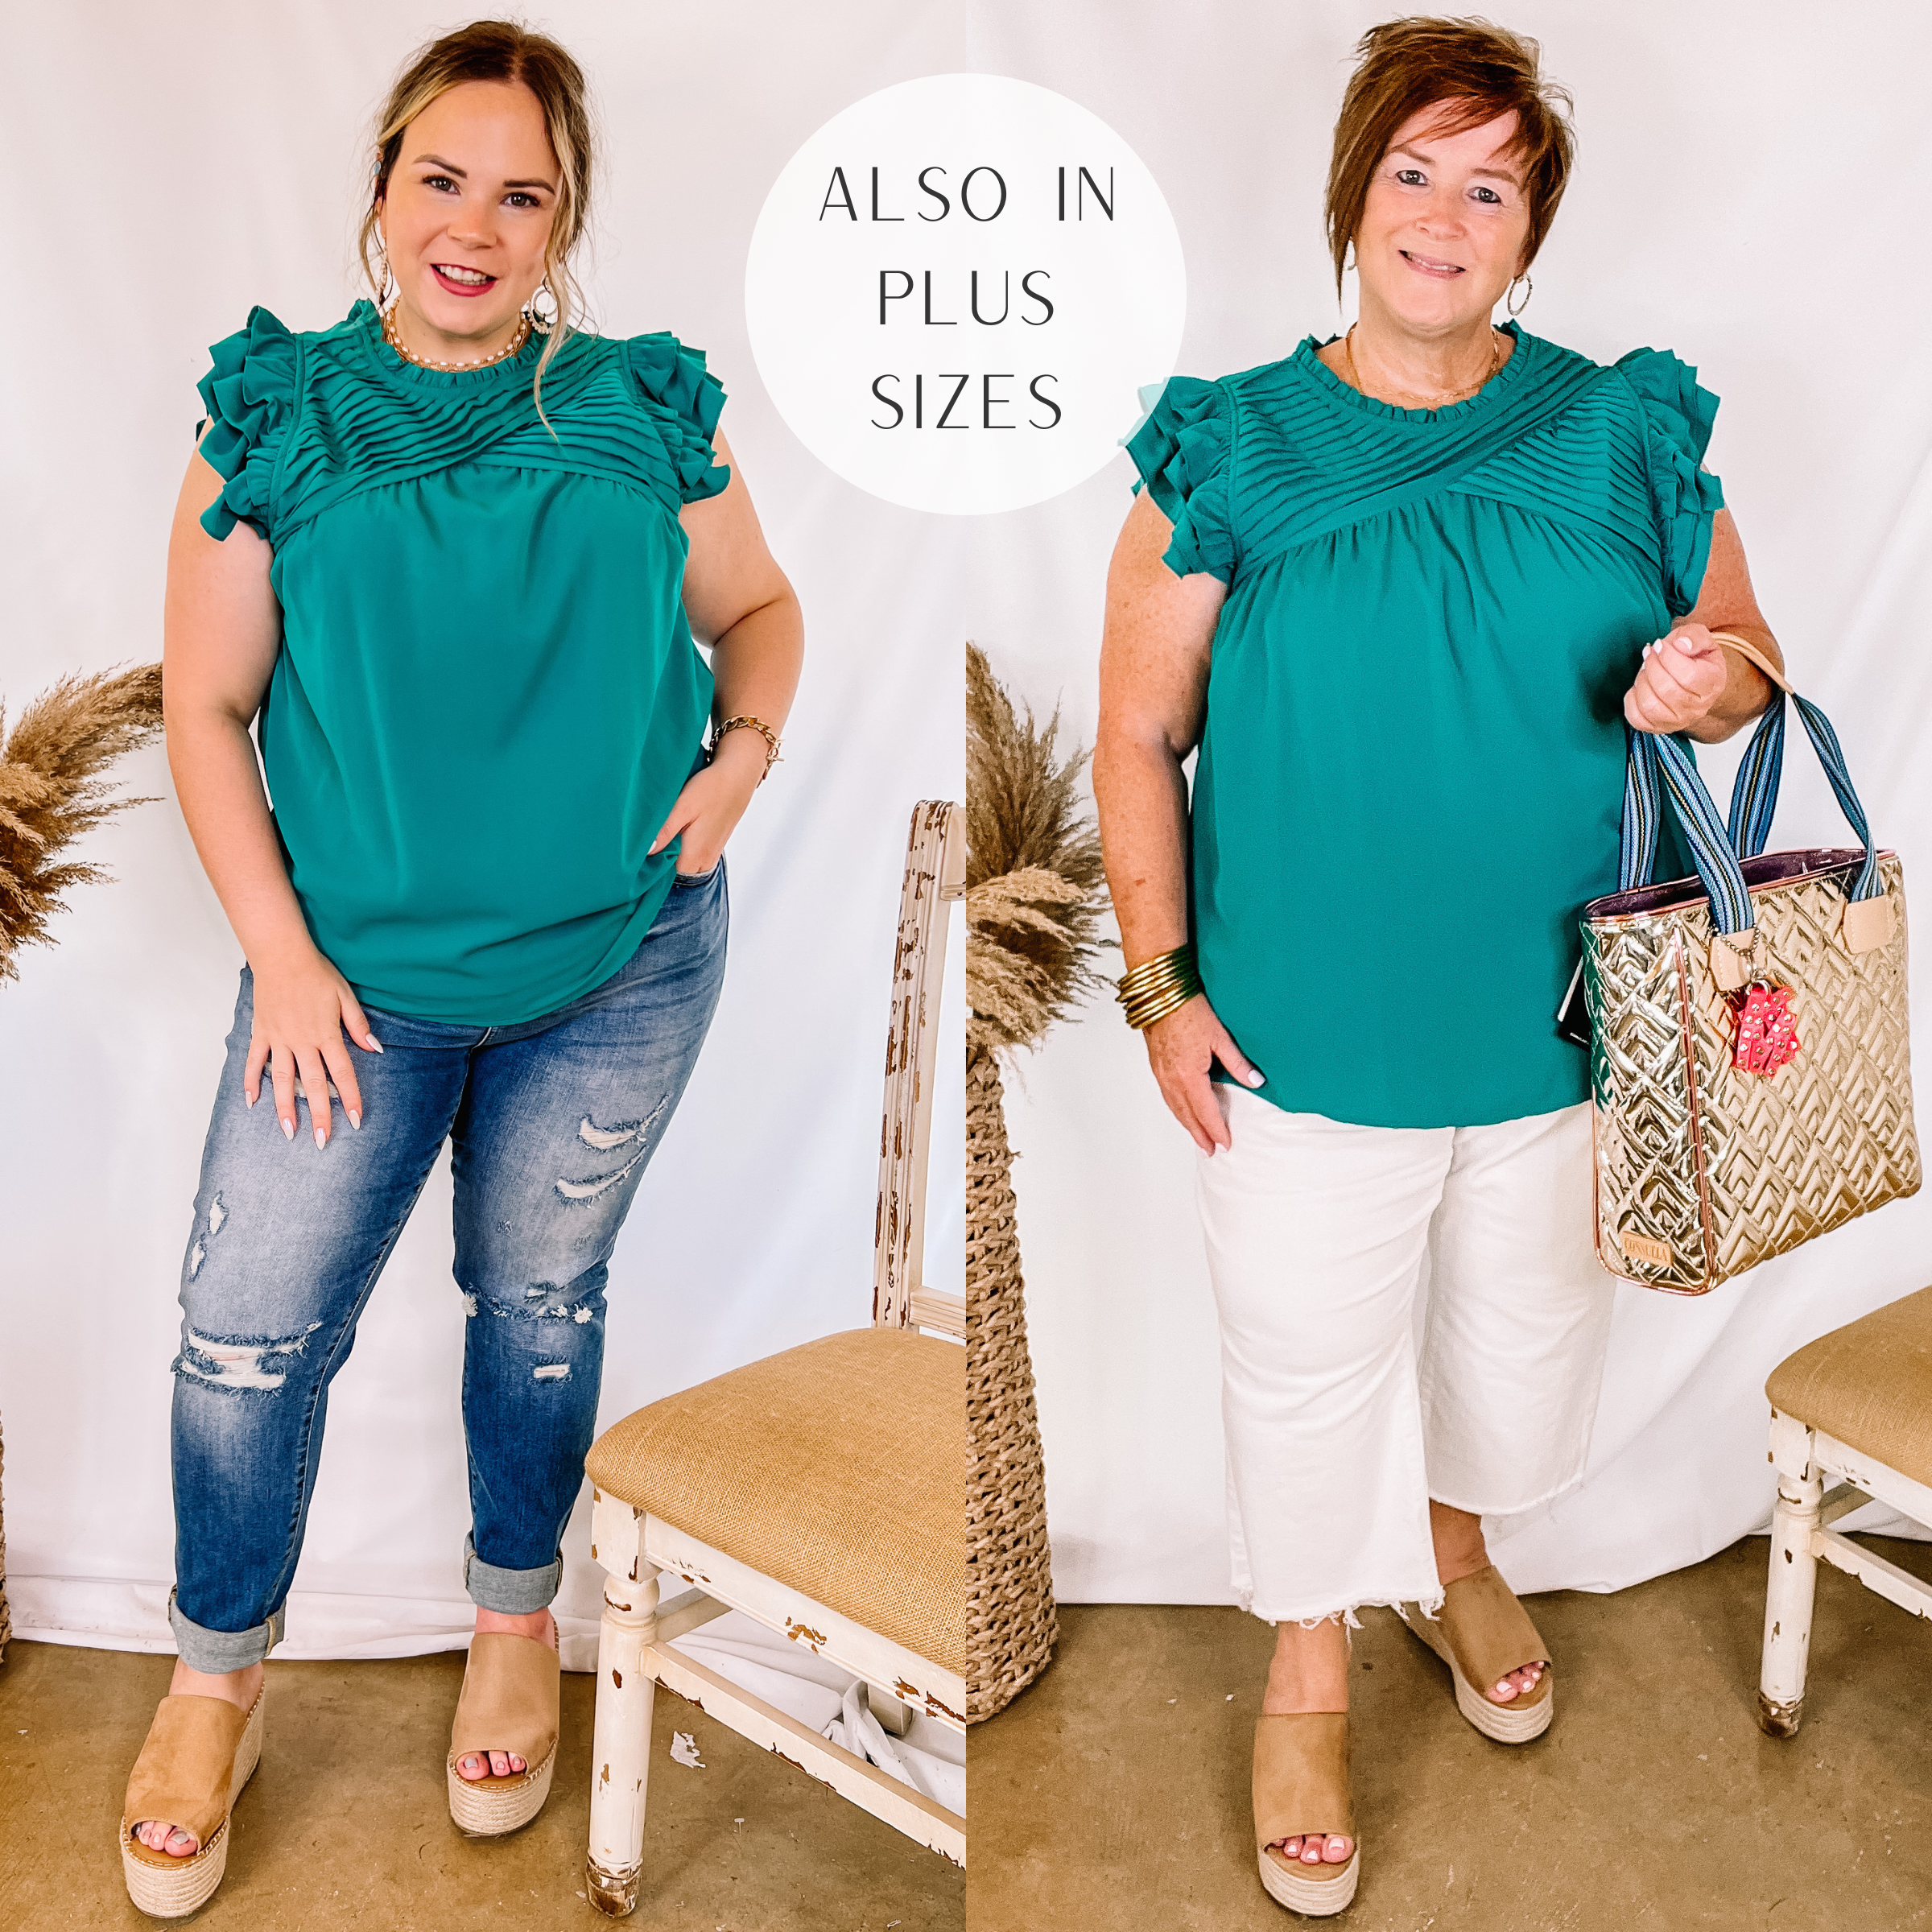 Model is wearing a teal green blouse with ruffle cap sleeves and pleated detailing around the neckline. Model has this top paired with distressed skinny jeans, tan wedges, and gold jewelry.